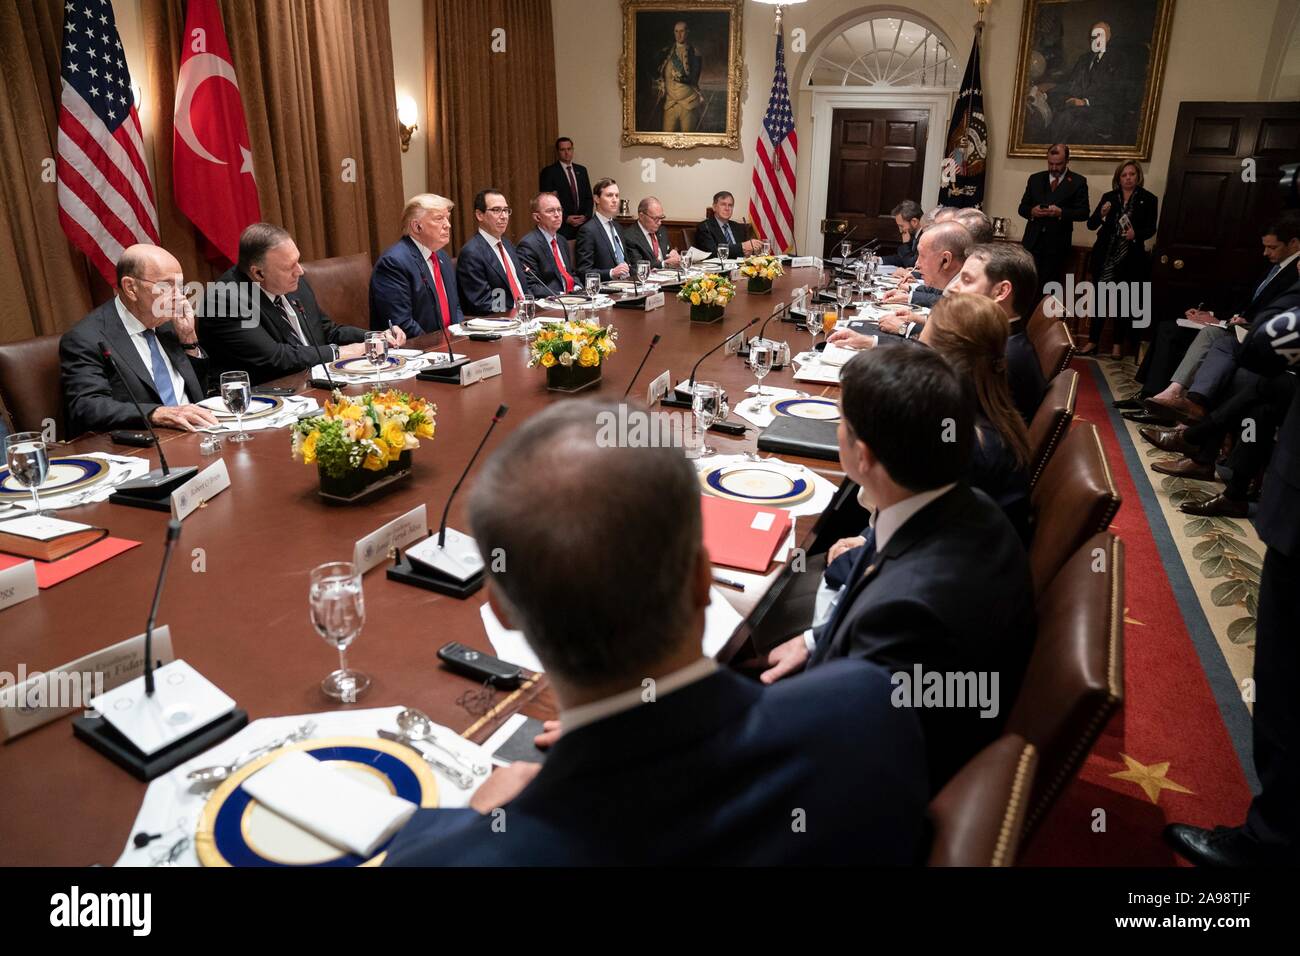 Washington, United States of America. 13 November, 2019. U.S President Donald Trump and Turkish President Recep Tayyip Erdogan hold and expanded bilateral meeting in the Cabinet Room of the White House November 13, 2019 in Washington, DC.  Credit: Shealah Craighead/White House Photo/Alamy Live News Stock Photo